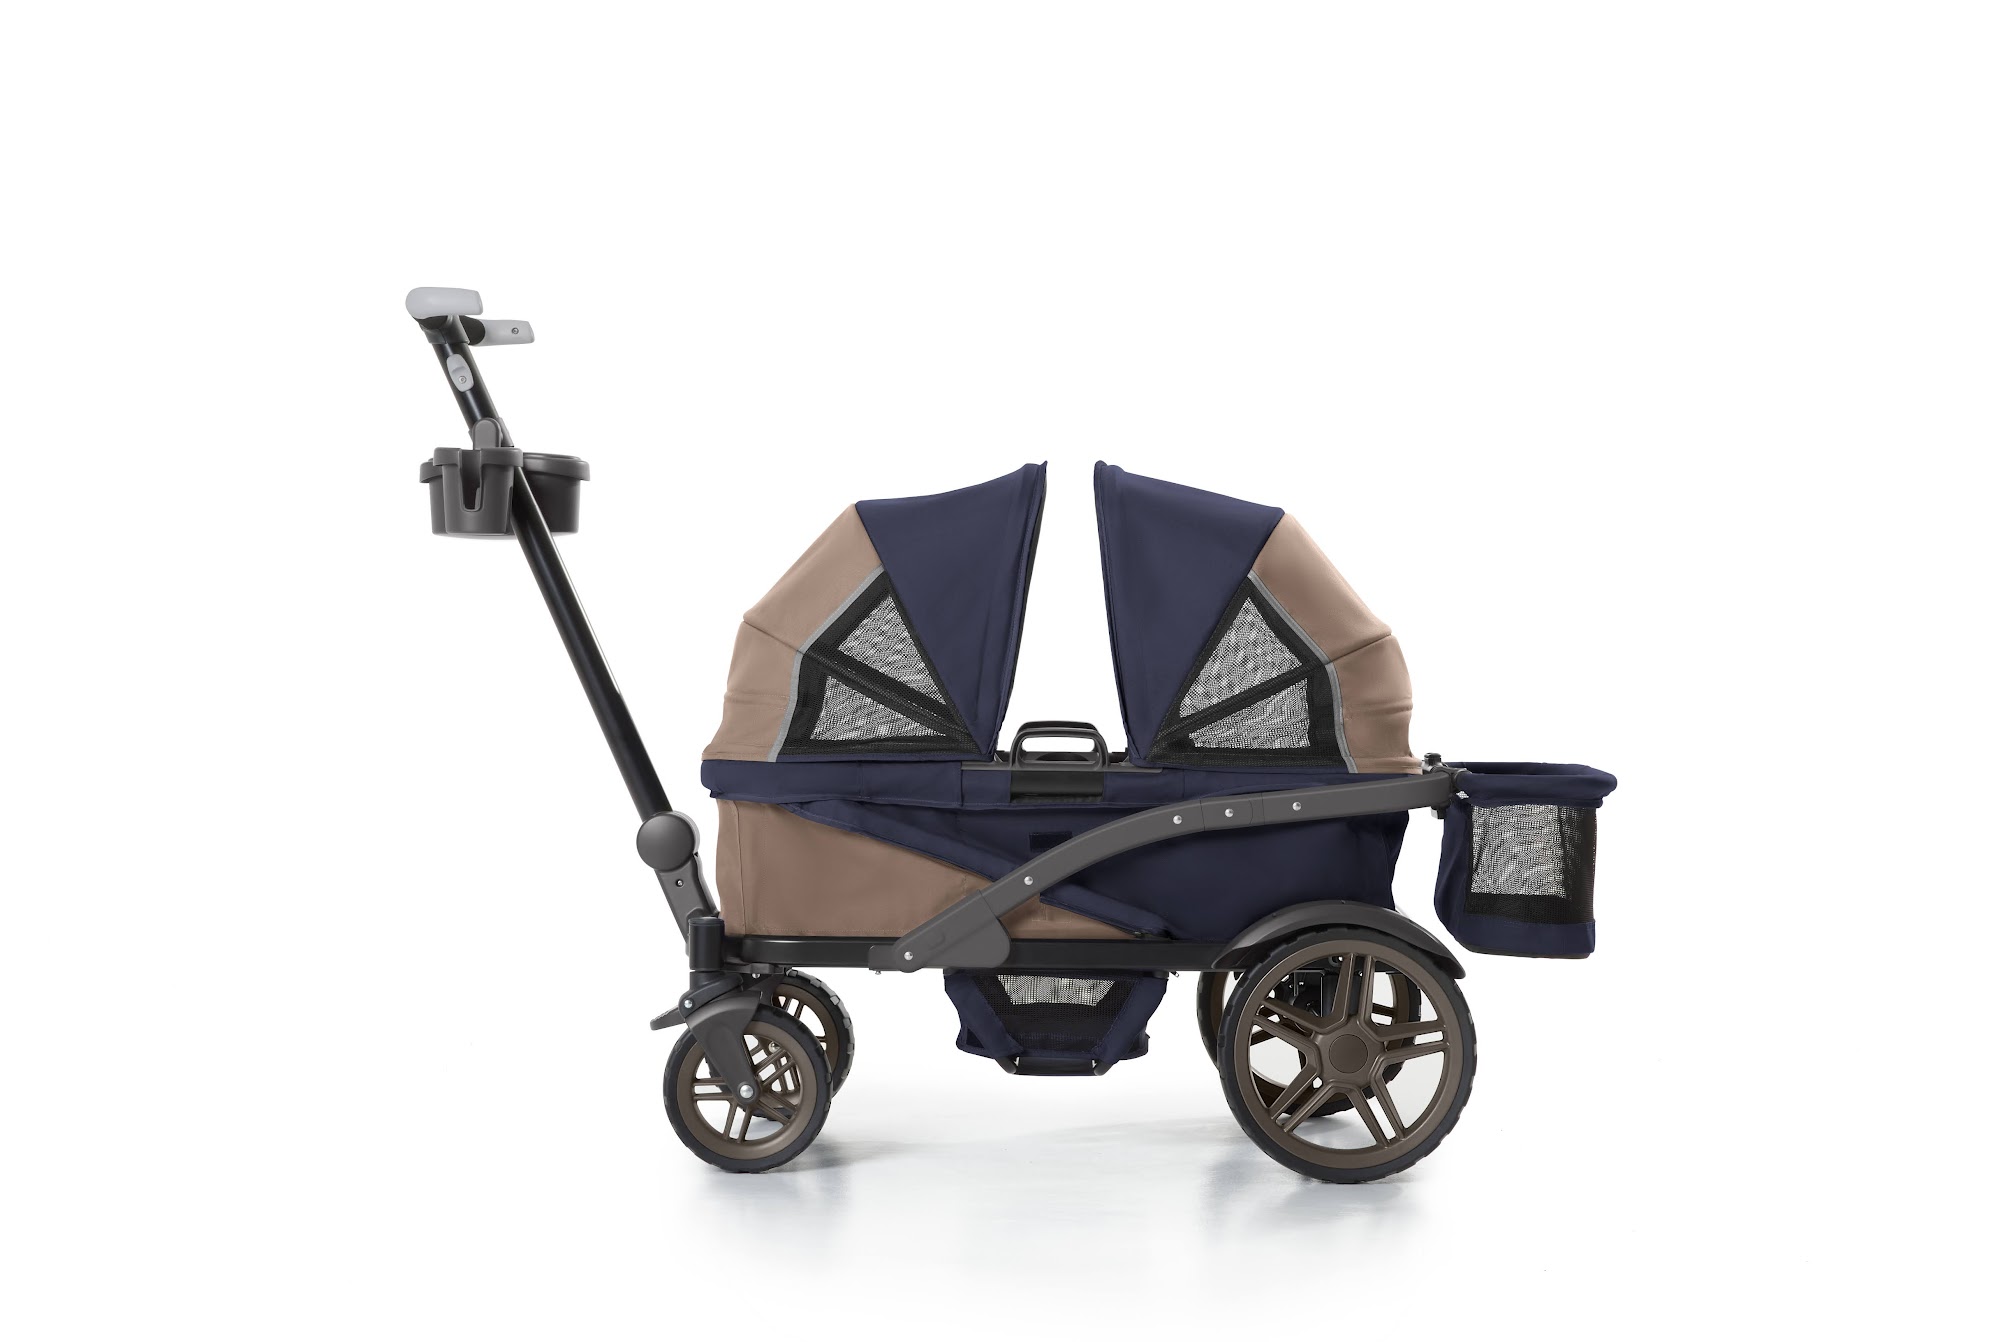 Anthem4 All-Terrain Wagon Stroller from Gladly Family